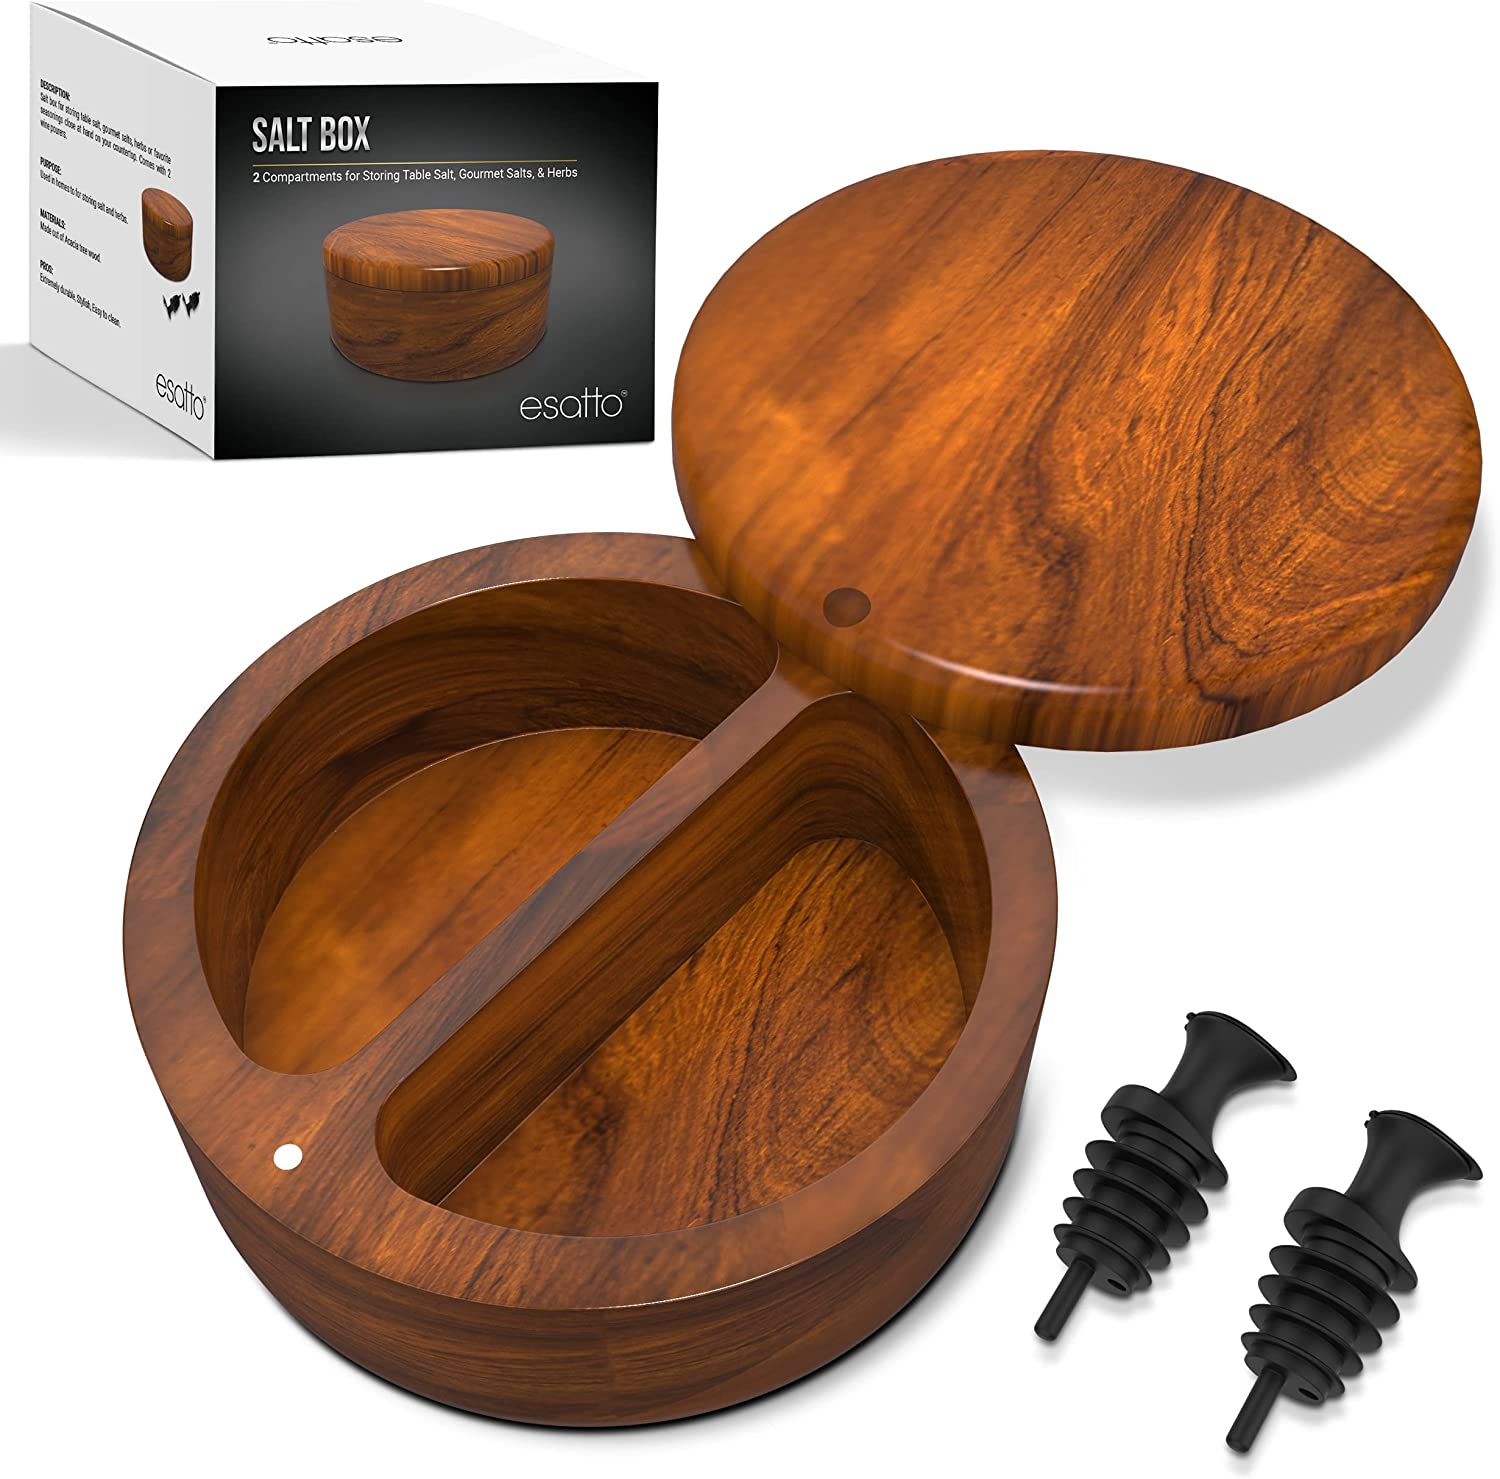 Esatto Round Acacia Wooden Salt and Spice Box, Magnetic Swivel Lid, Salt pepper or Spice Storage Box, two compartments, 2 Wine Pourers Included